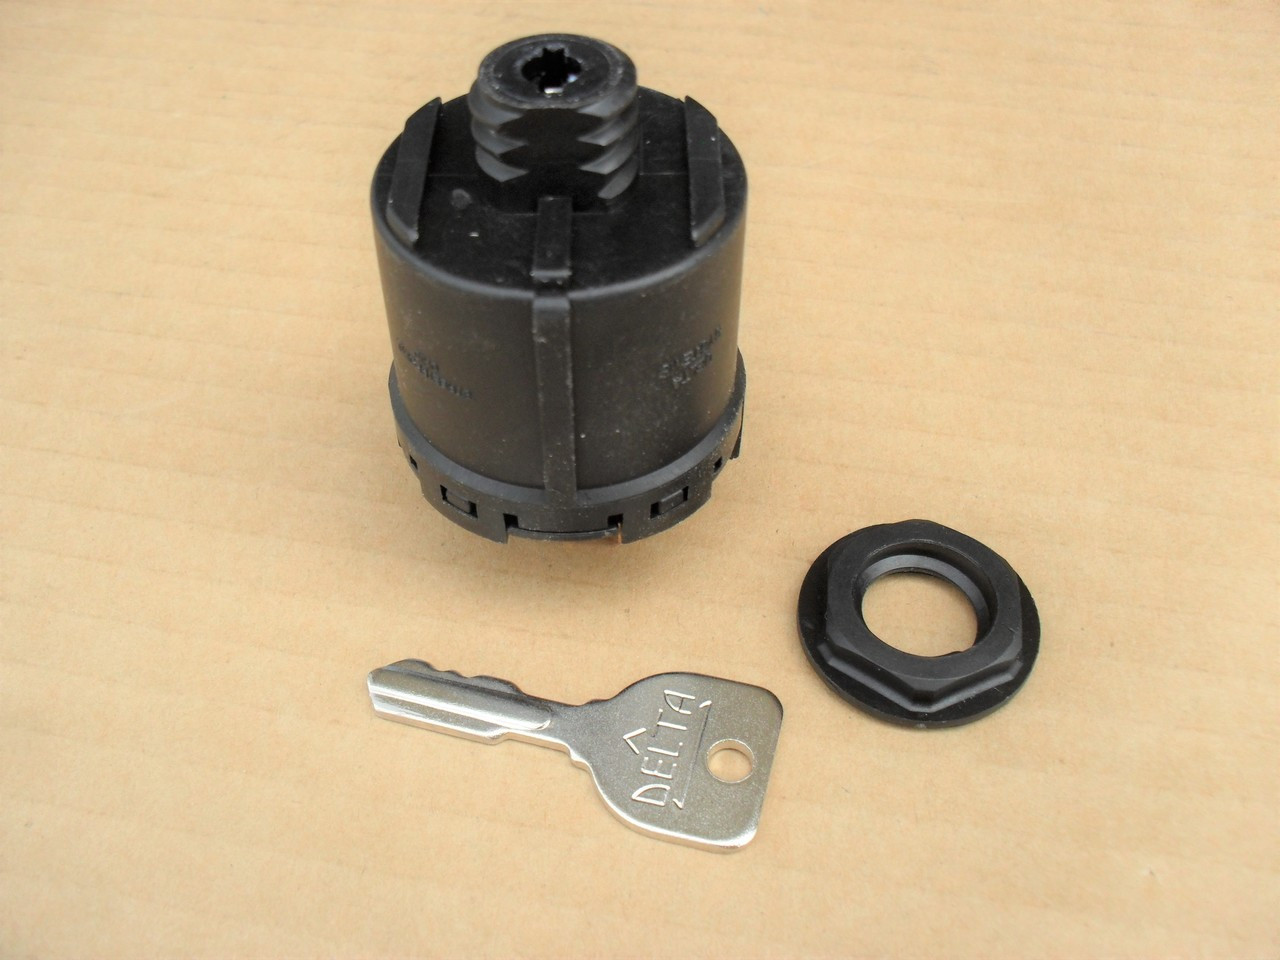 Ignition Starter Switch for Partner 532140399 532144921 532145499 532158913 532163088 Includes Key